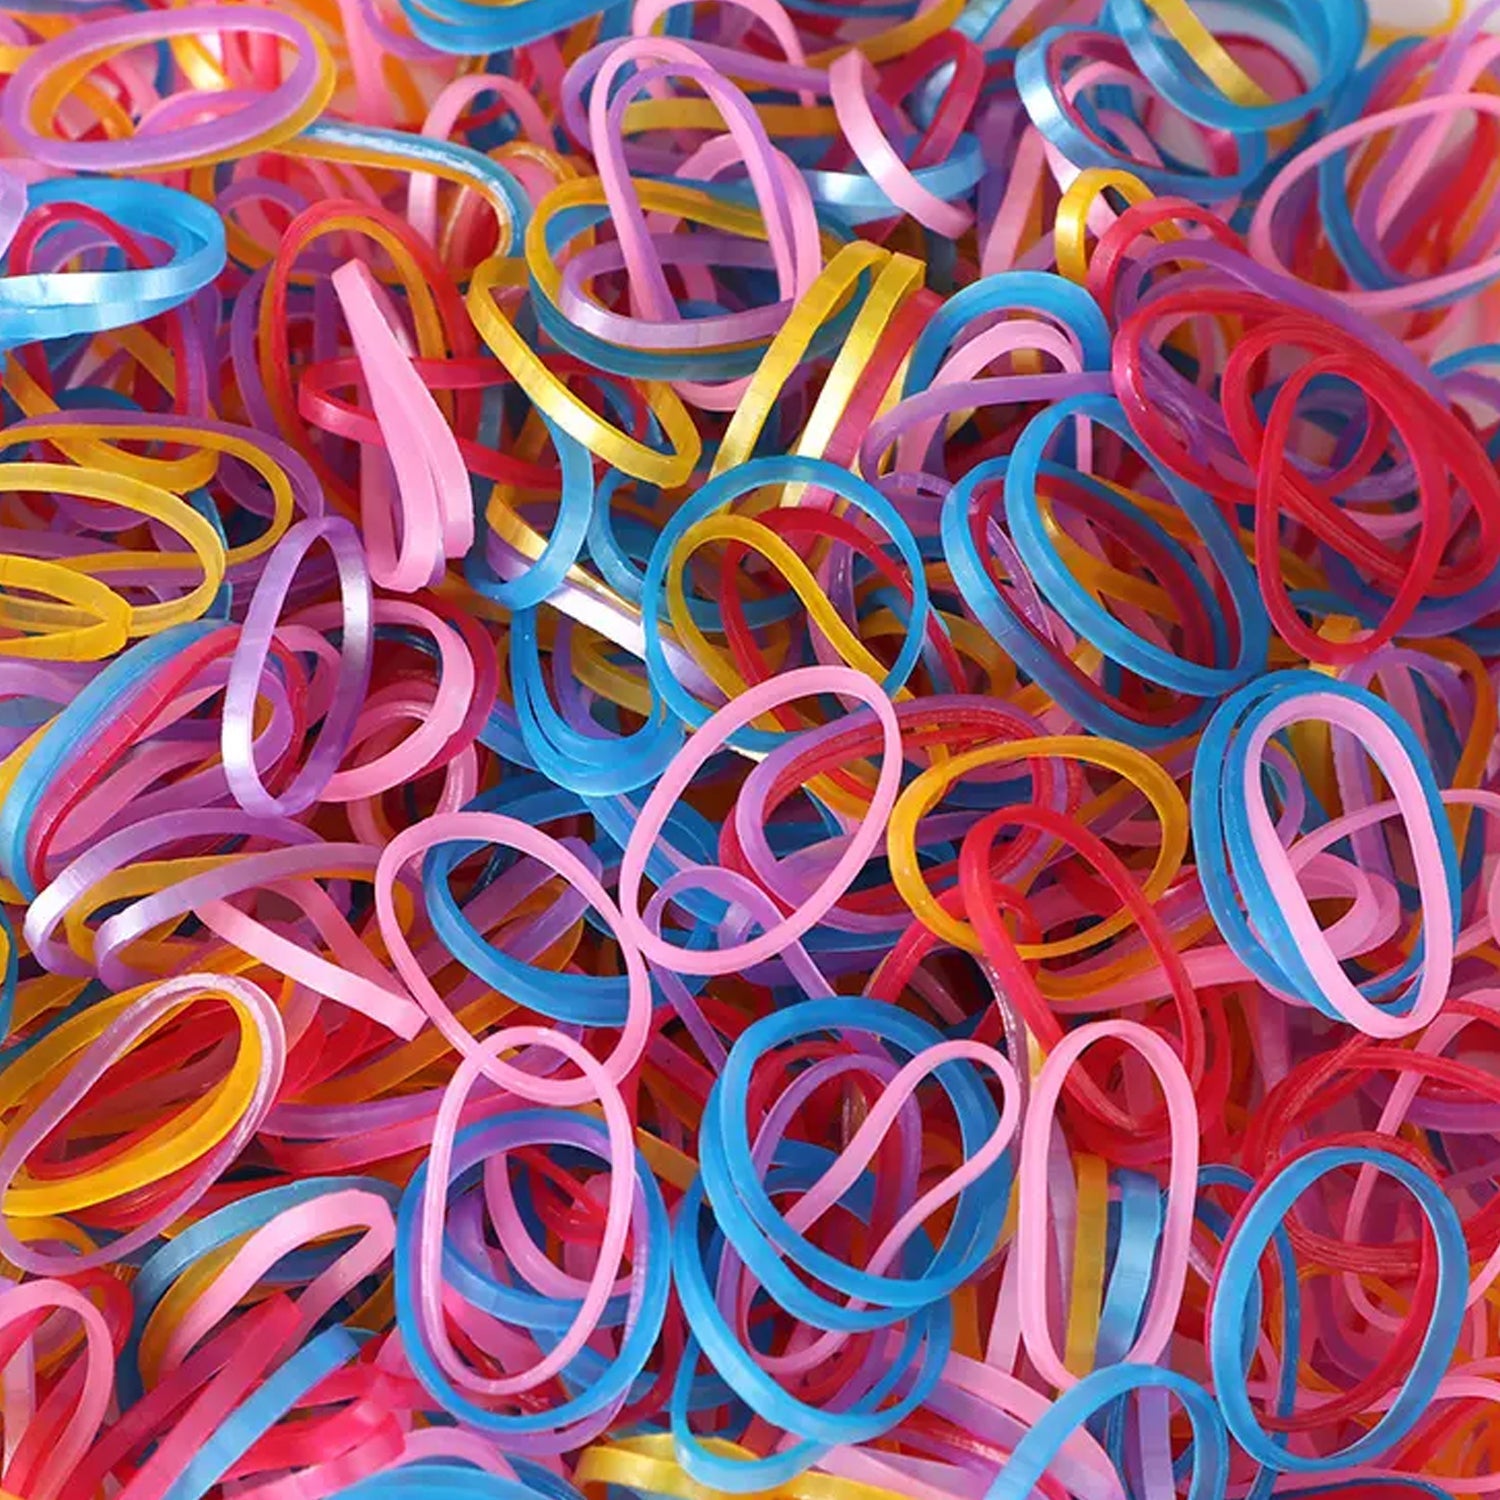 4354 RUBBER BAND FOR OFFICE/HOME AND KITCHEN ACCESSORIES ITEM PRODUCTS, ELASTIC RUBBER BANDS, FLEXIBLE REUSABLE NYLON ELASTIC UNBREAKABLE, FOR STATIONERY, SCHOOL MULTICOLOR (0.5 Inch / 50 Gm)